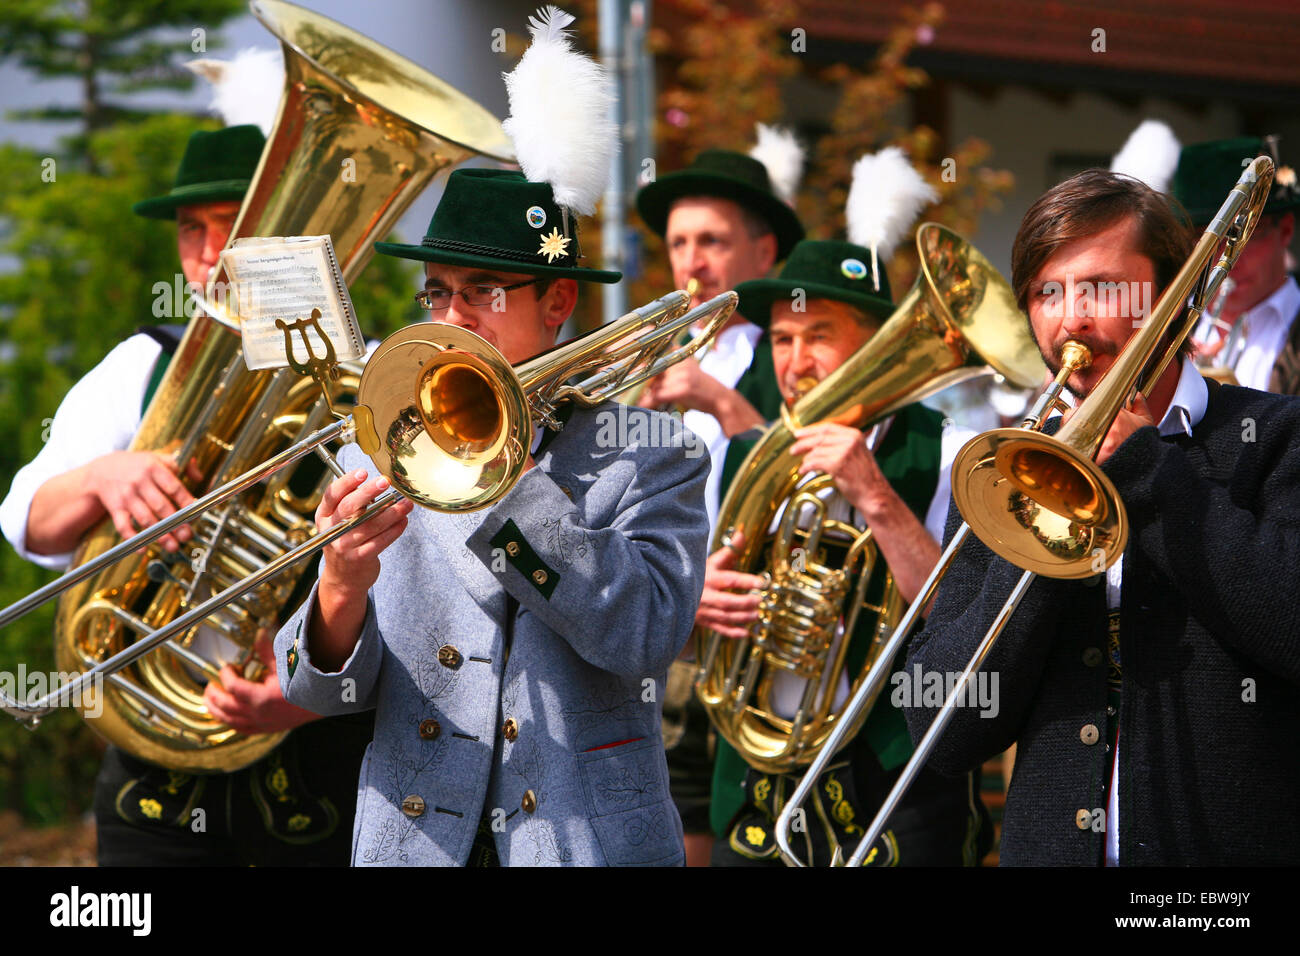 brass band playing during the errection of a maypole, Germany, Bavaria, Bad Aibling Stock Photo